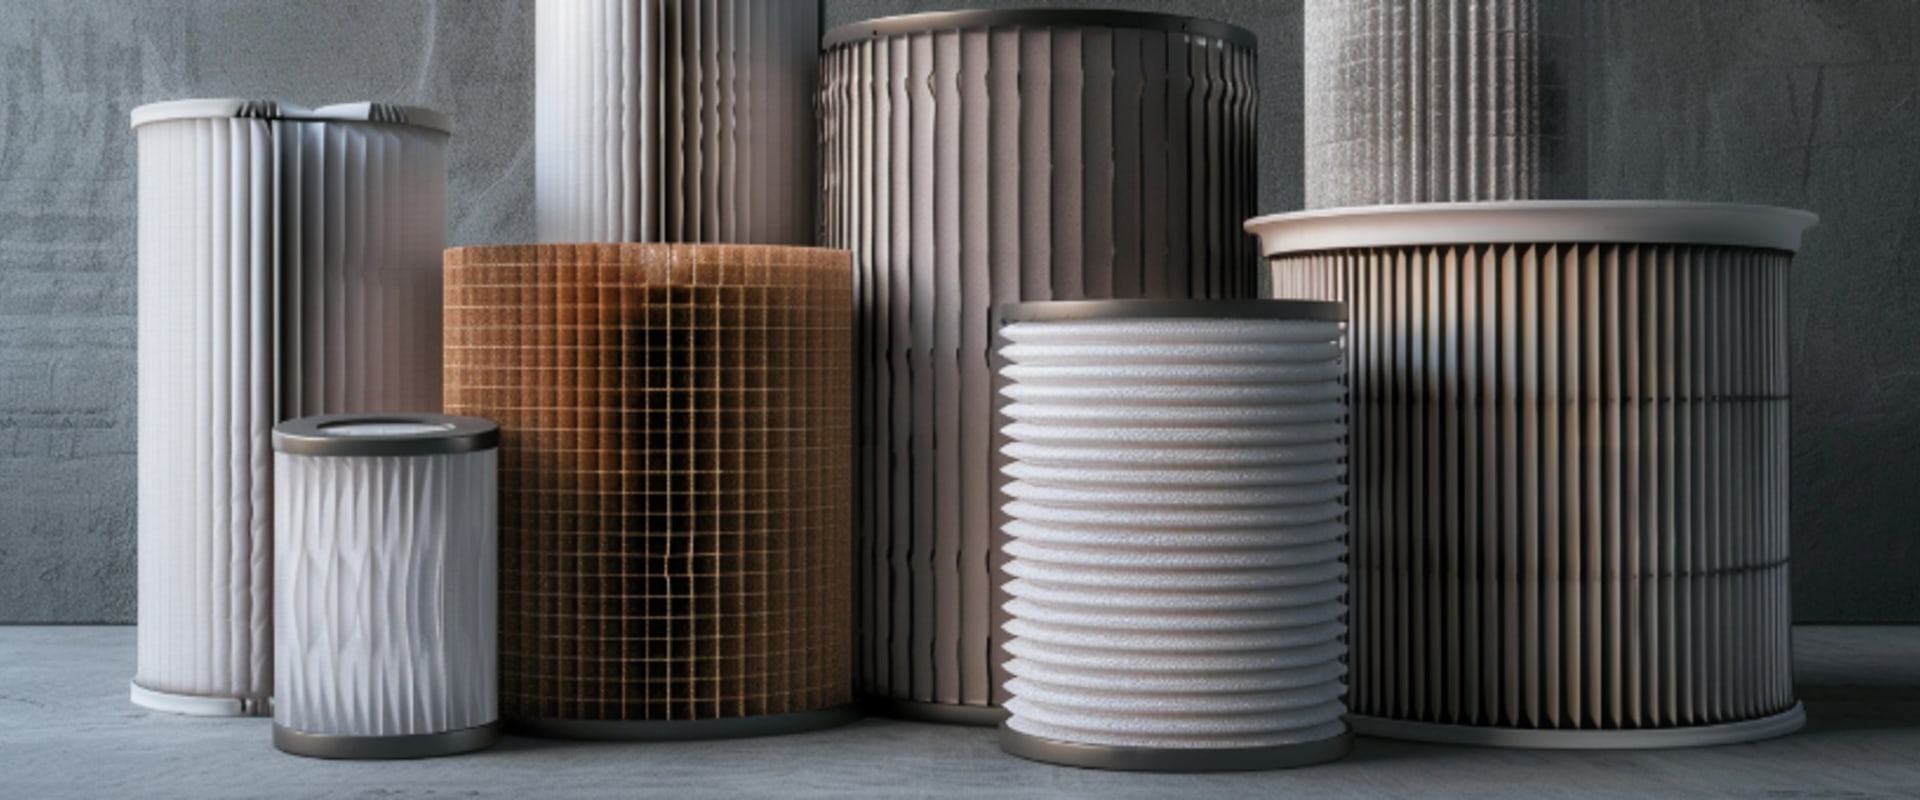 Top-Rated Home Air Filters in Your Area